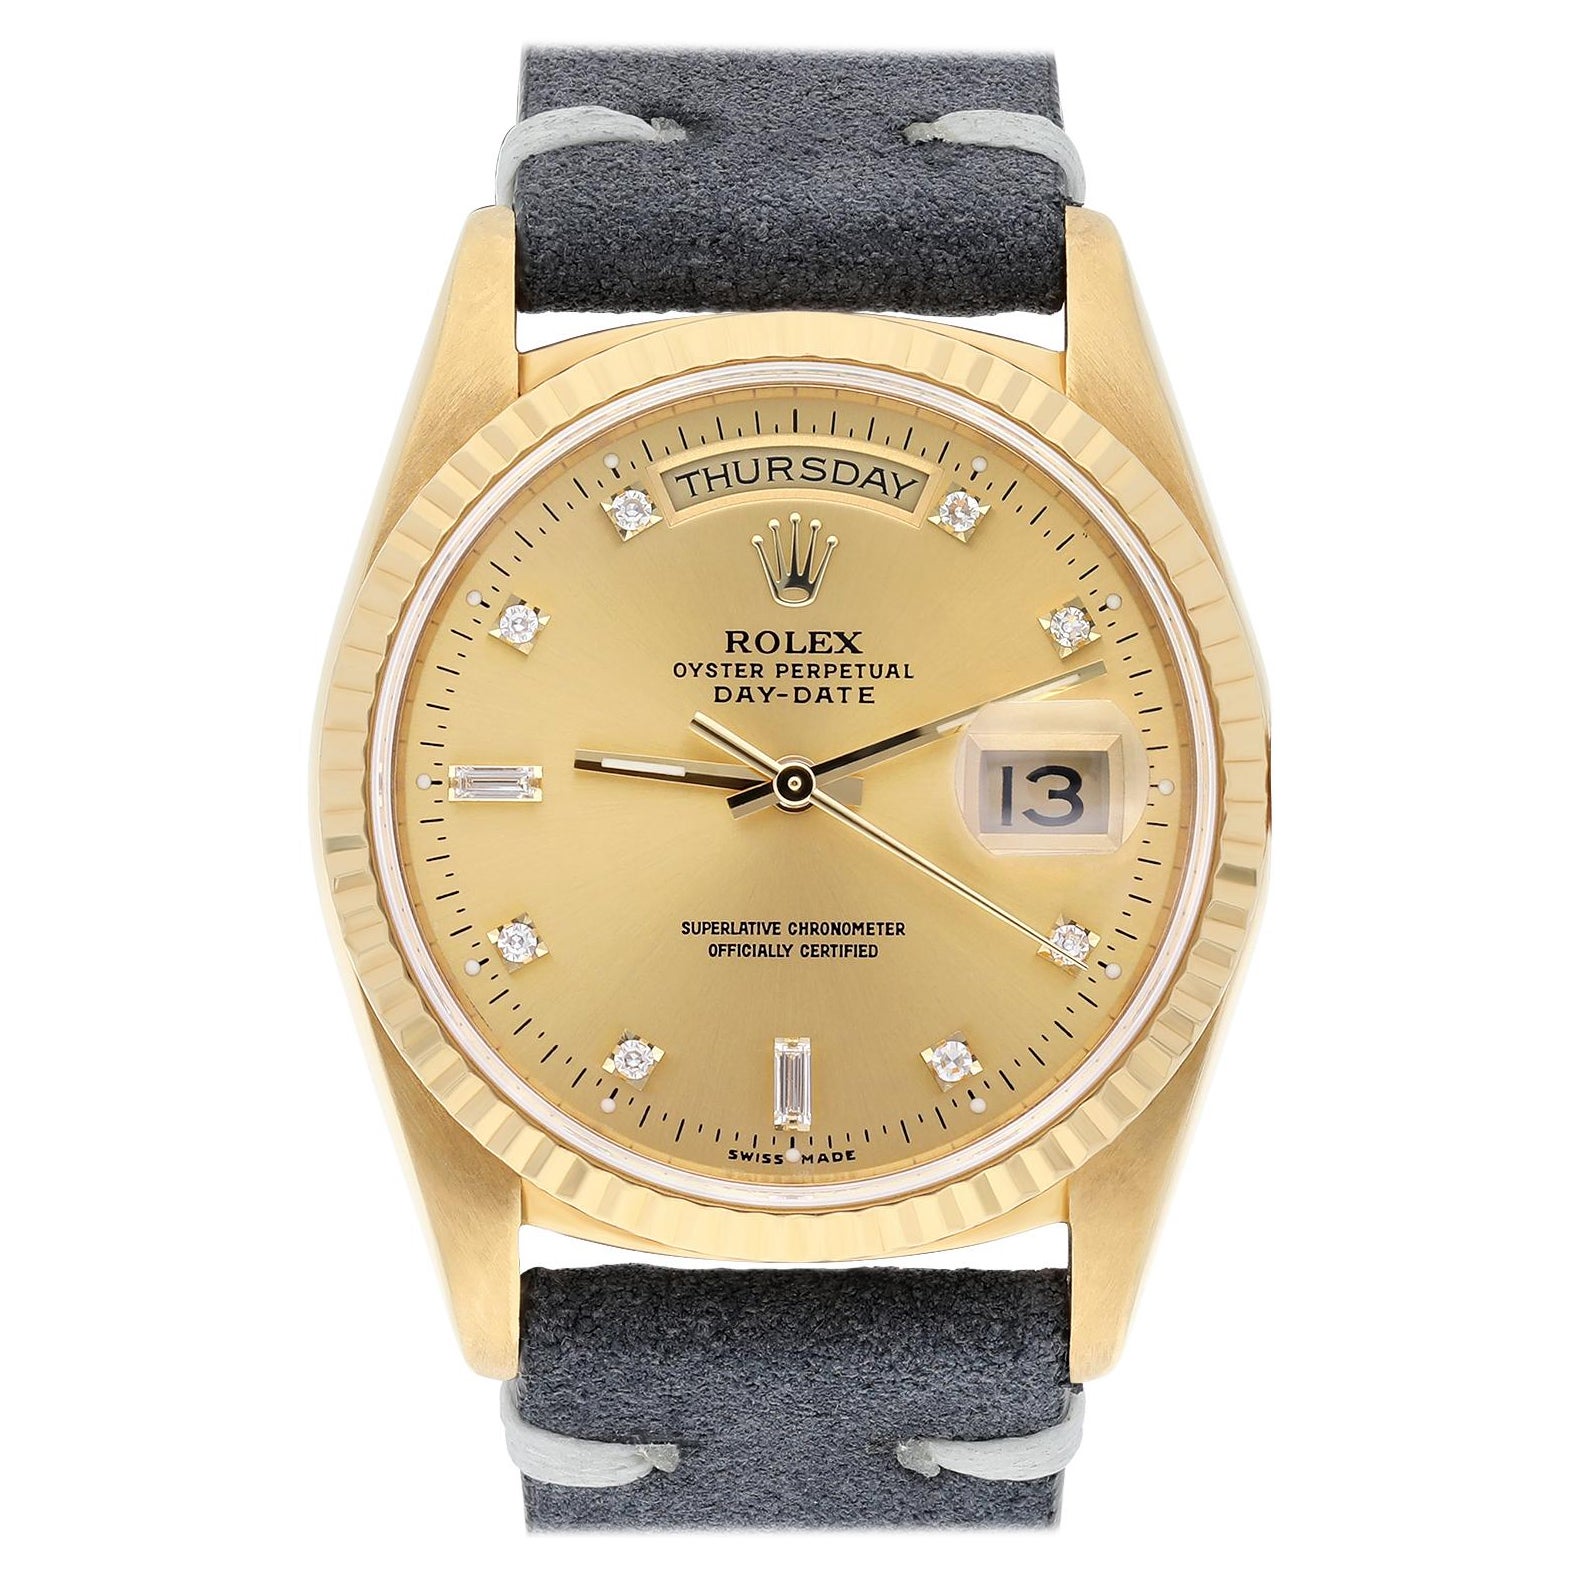 Rolex Day-Date 36mm 18238 18K Yellow Gold Watch Fluted Bezel Champagne Diamond For Sale